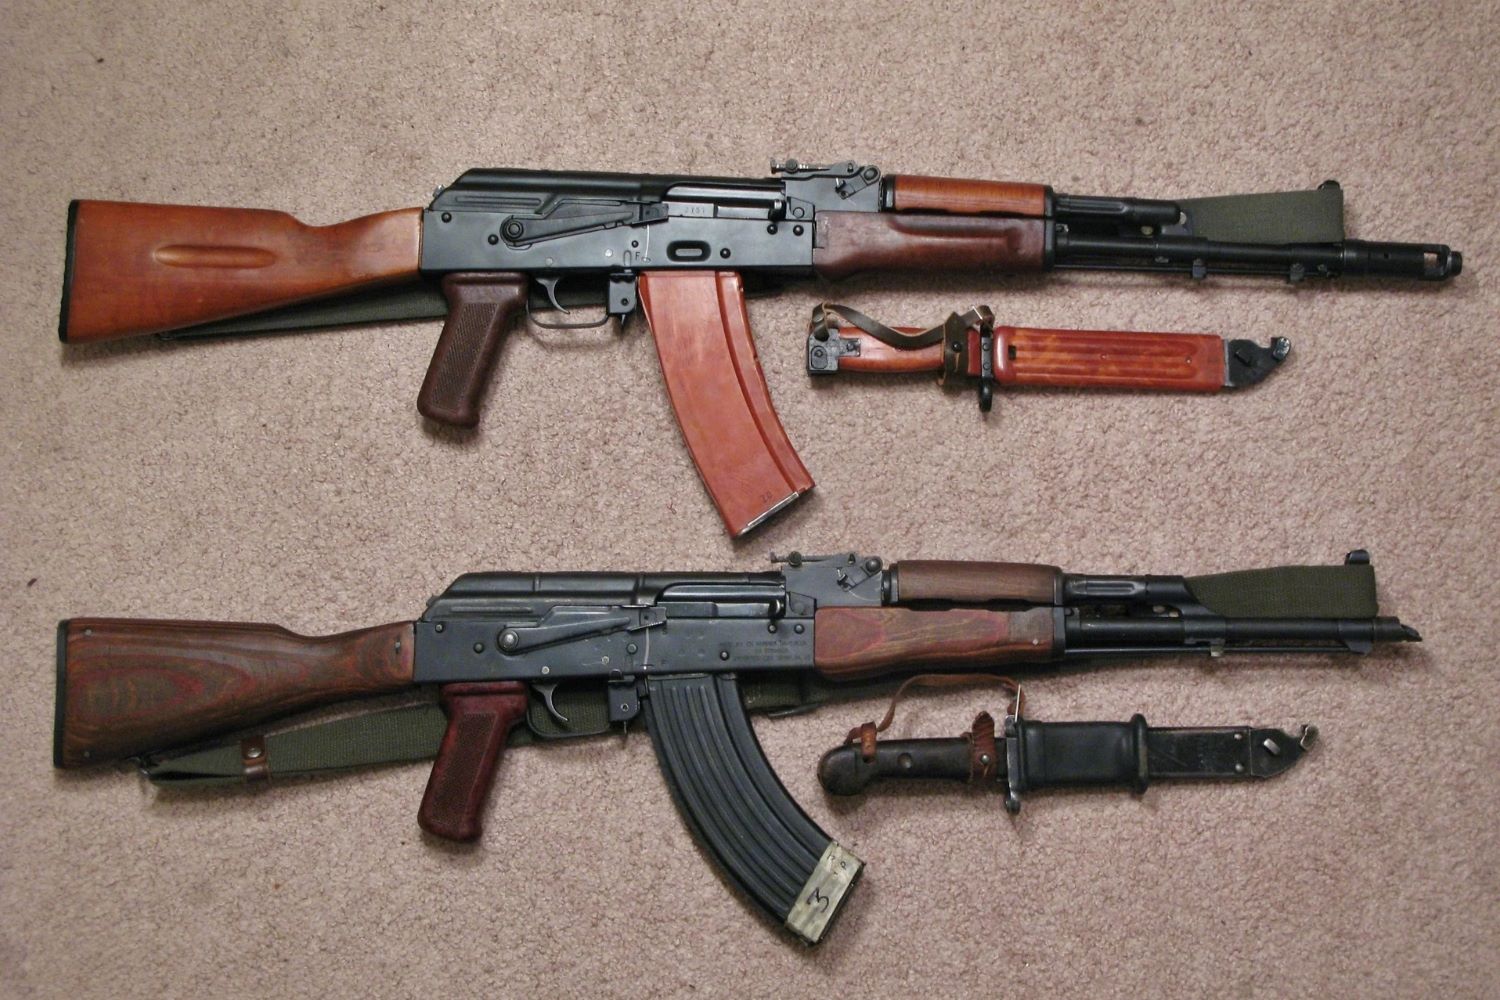 The Ultimate Guide To Distinguishing AK-47 From AK-74 – You Won’t Believe The Key Differences!